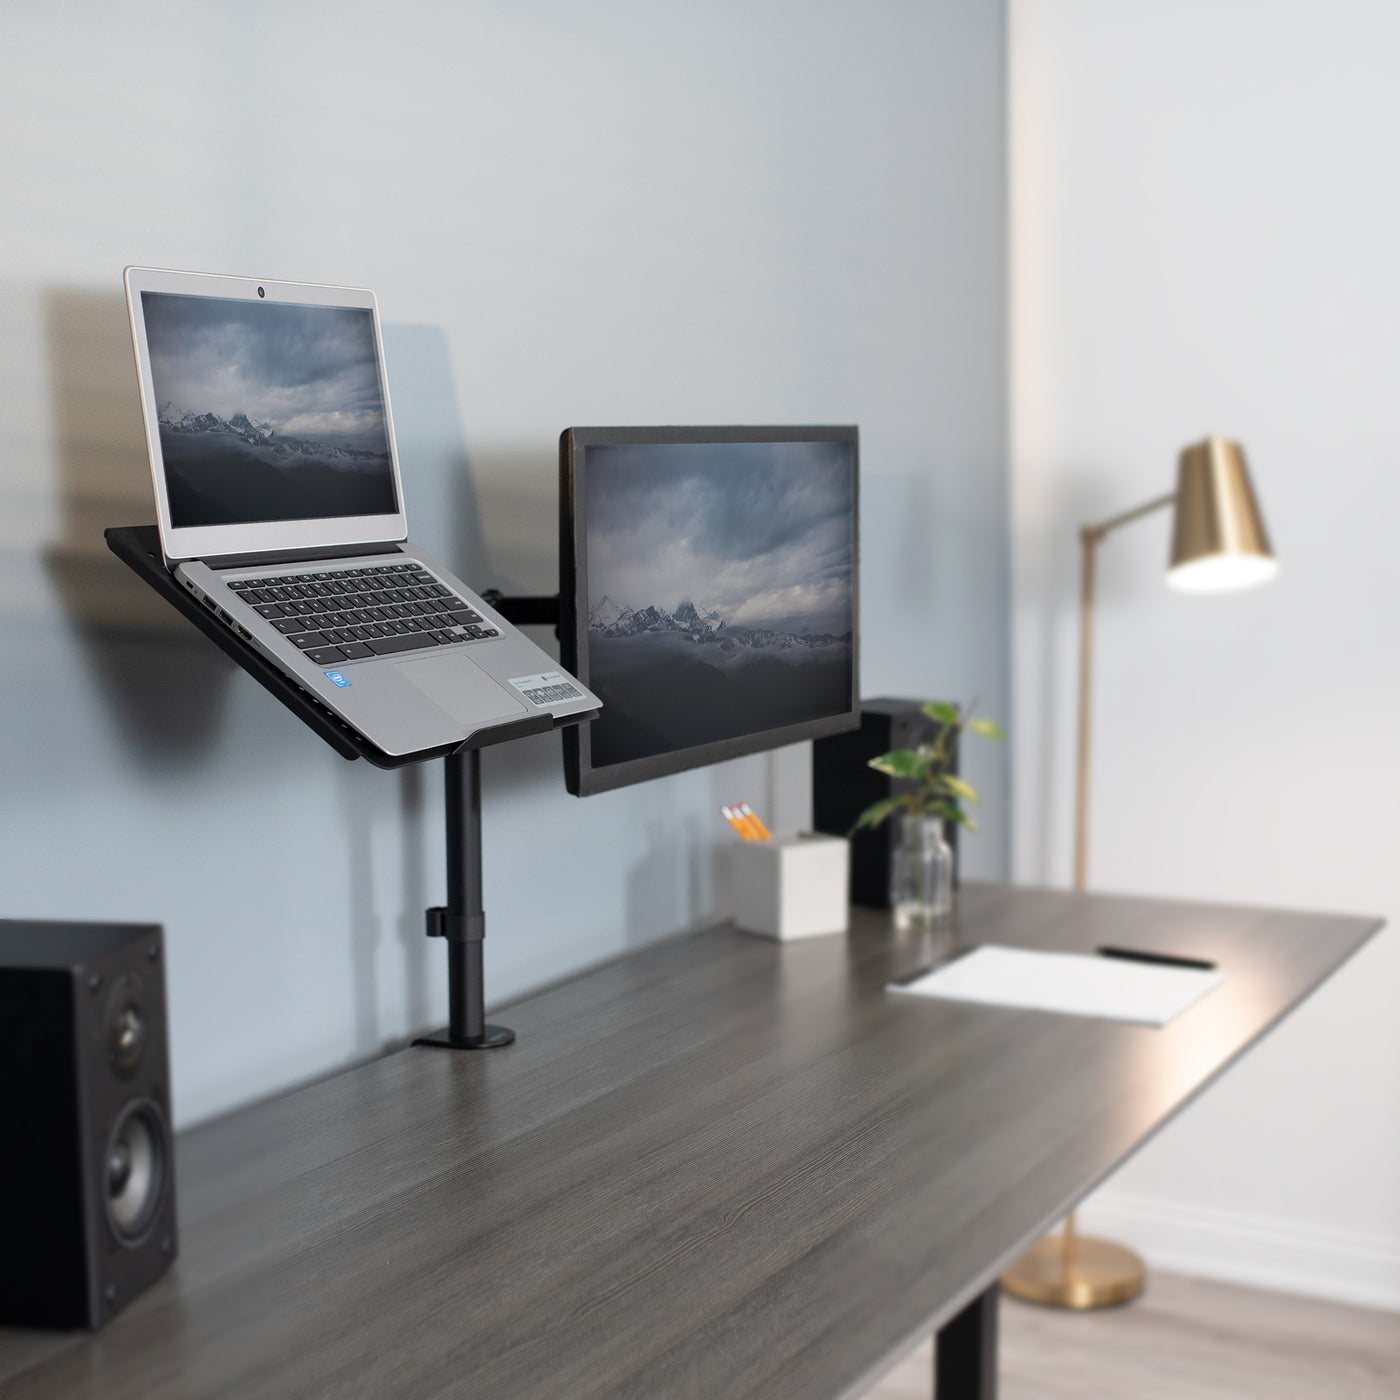 A laptop stands on the same pole as a single monitor mount holding the laptop screen and monitor screen at similar levels.